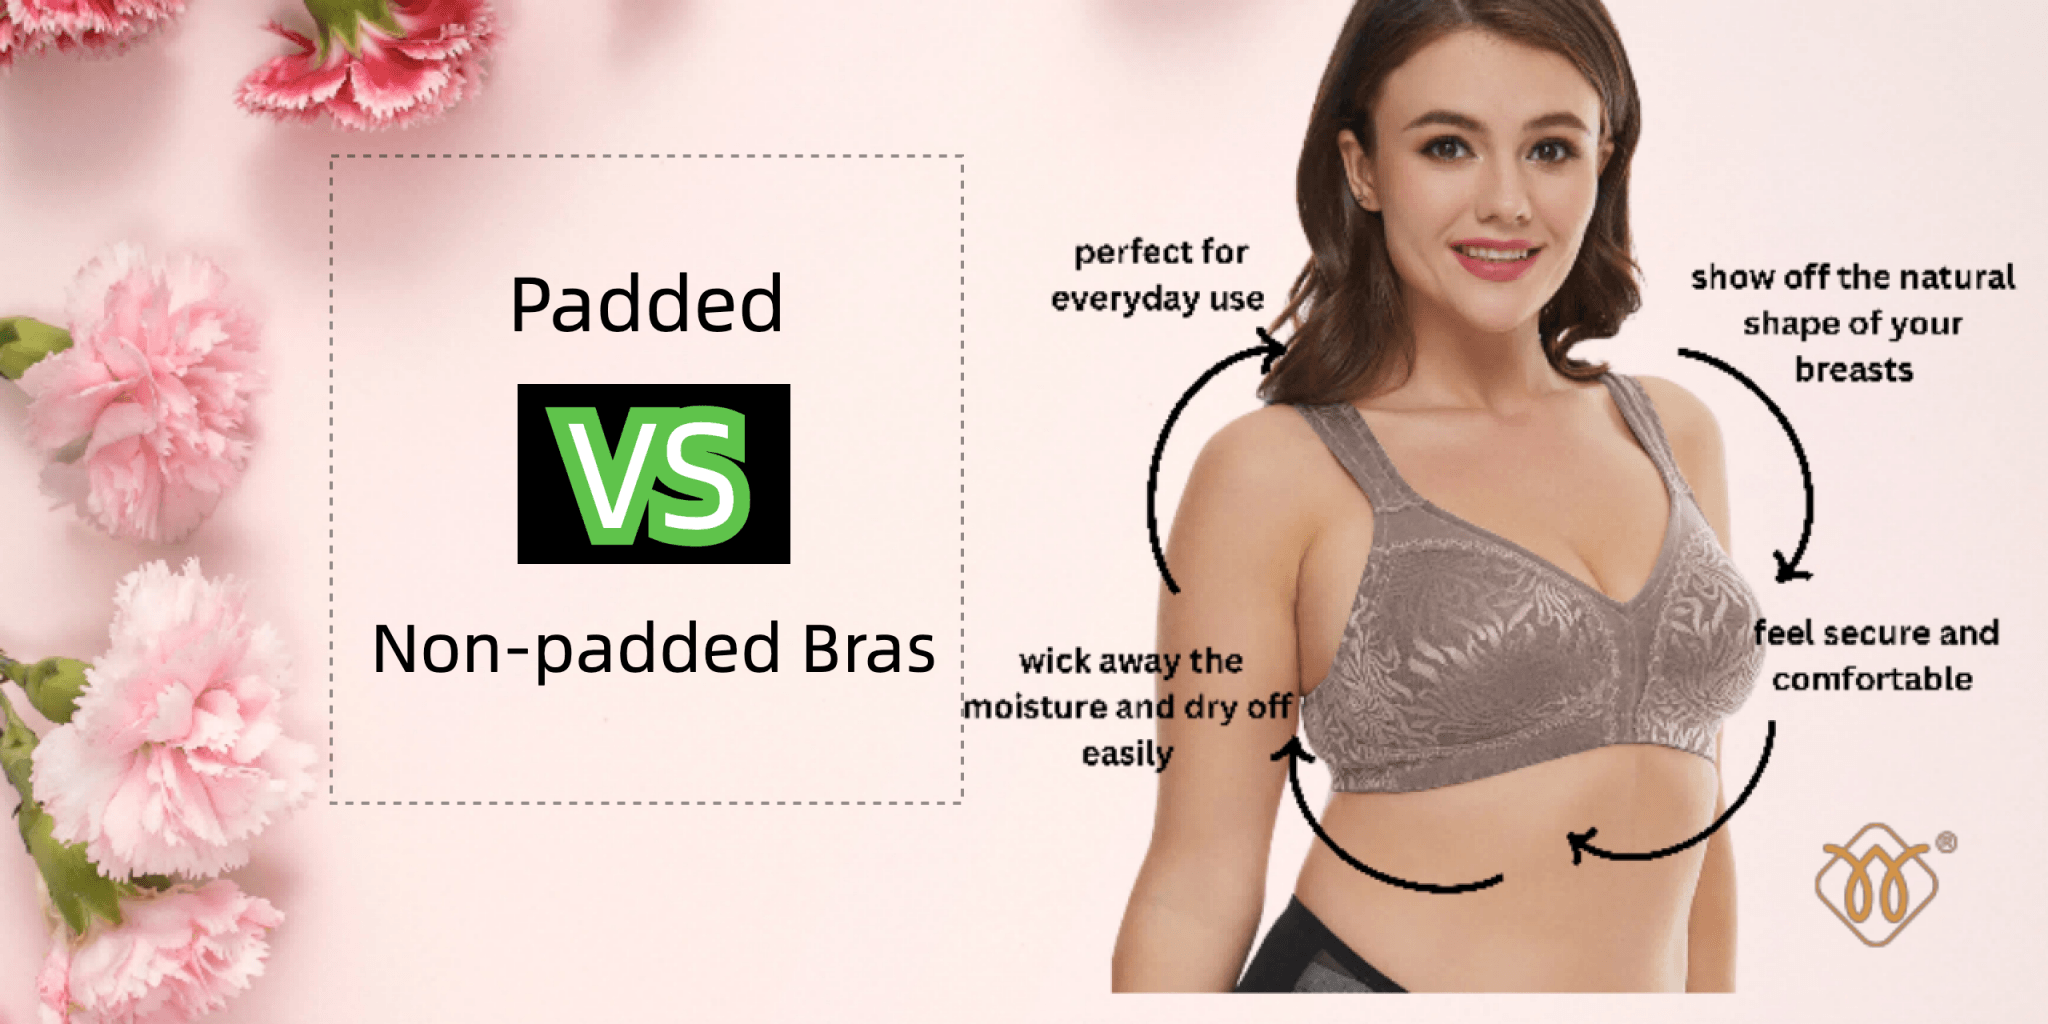 Enhance your curves with these padded bra inserts